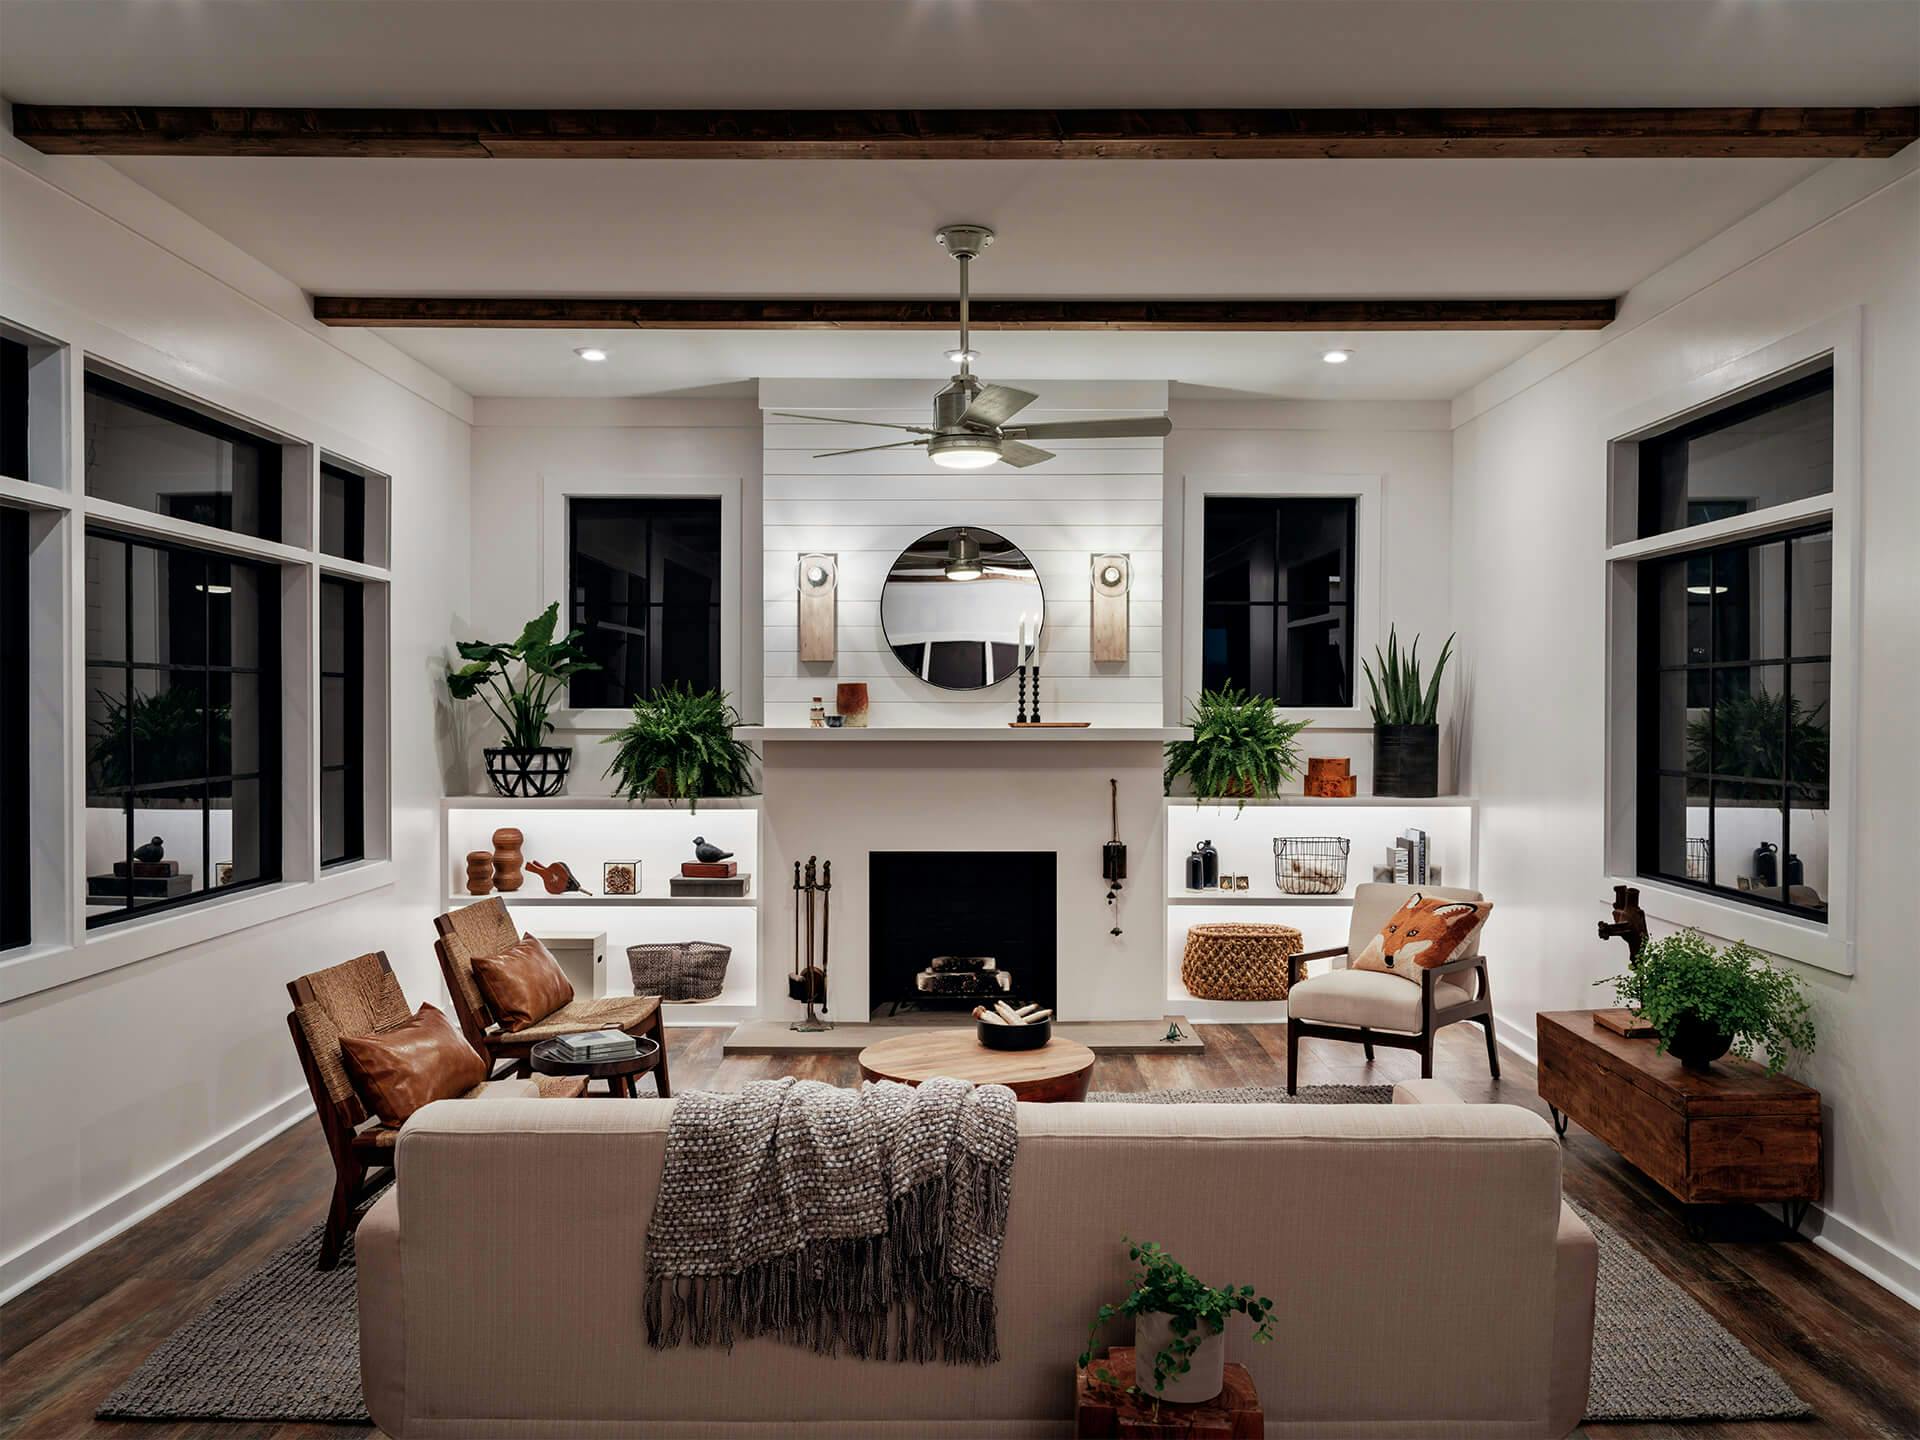 A living room lit up by a Colerne ceiling fan, Marquee sconces on the back wall, and flush mounts, all turned on during the night 